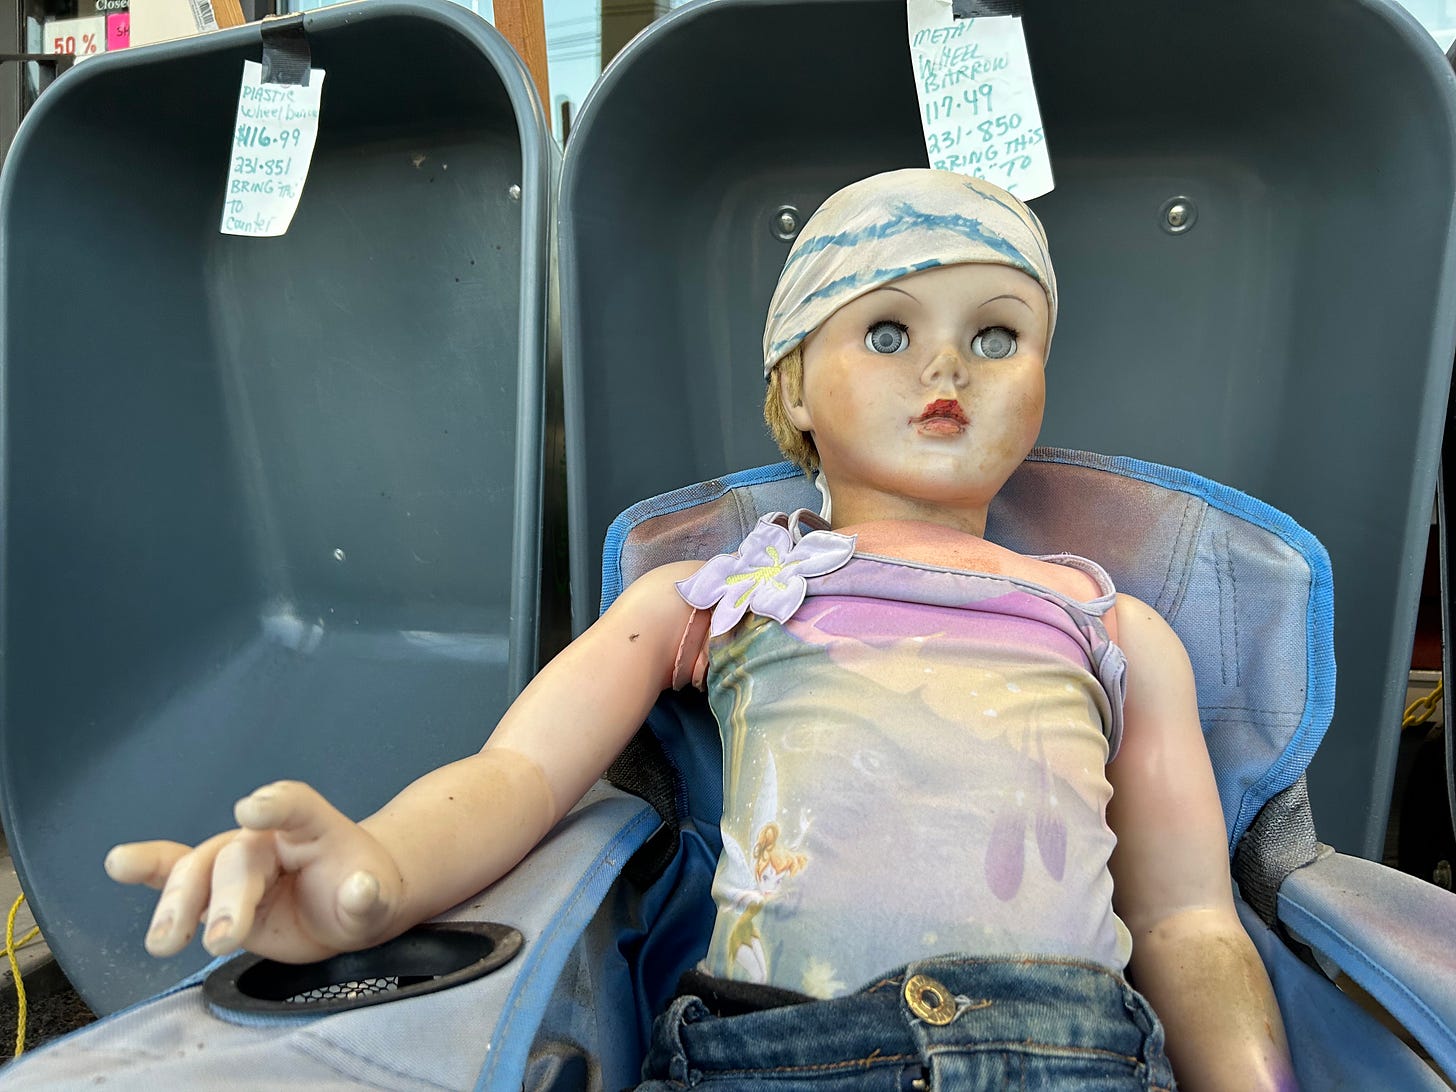 lifesize girl doll sitting in lawnchair in front of two wheelbarrows, wearing headscarf, tanktop, and jeans